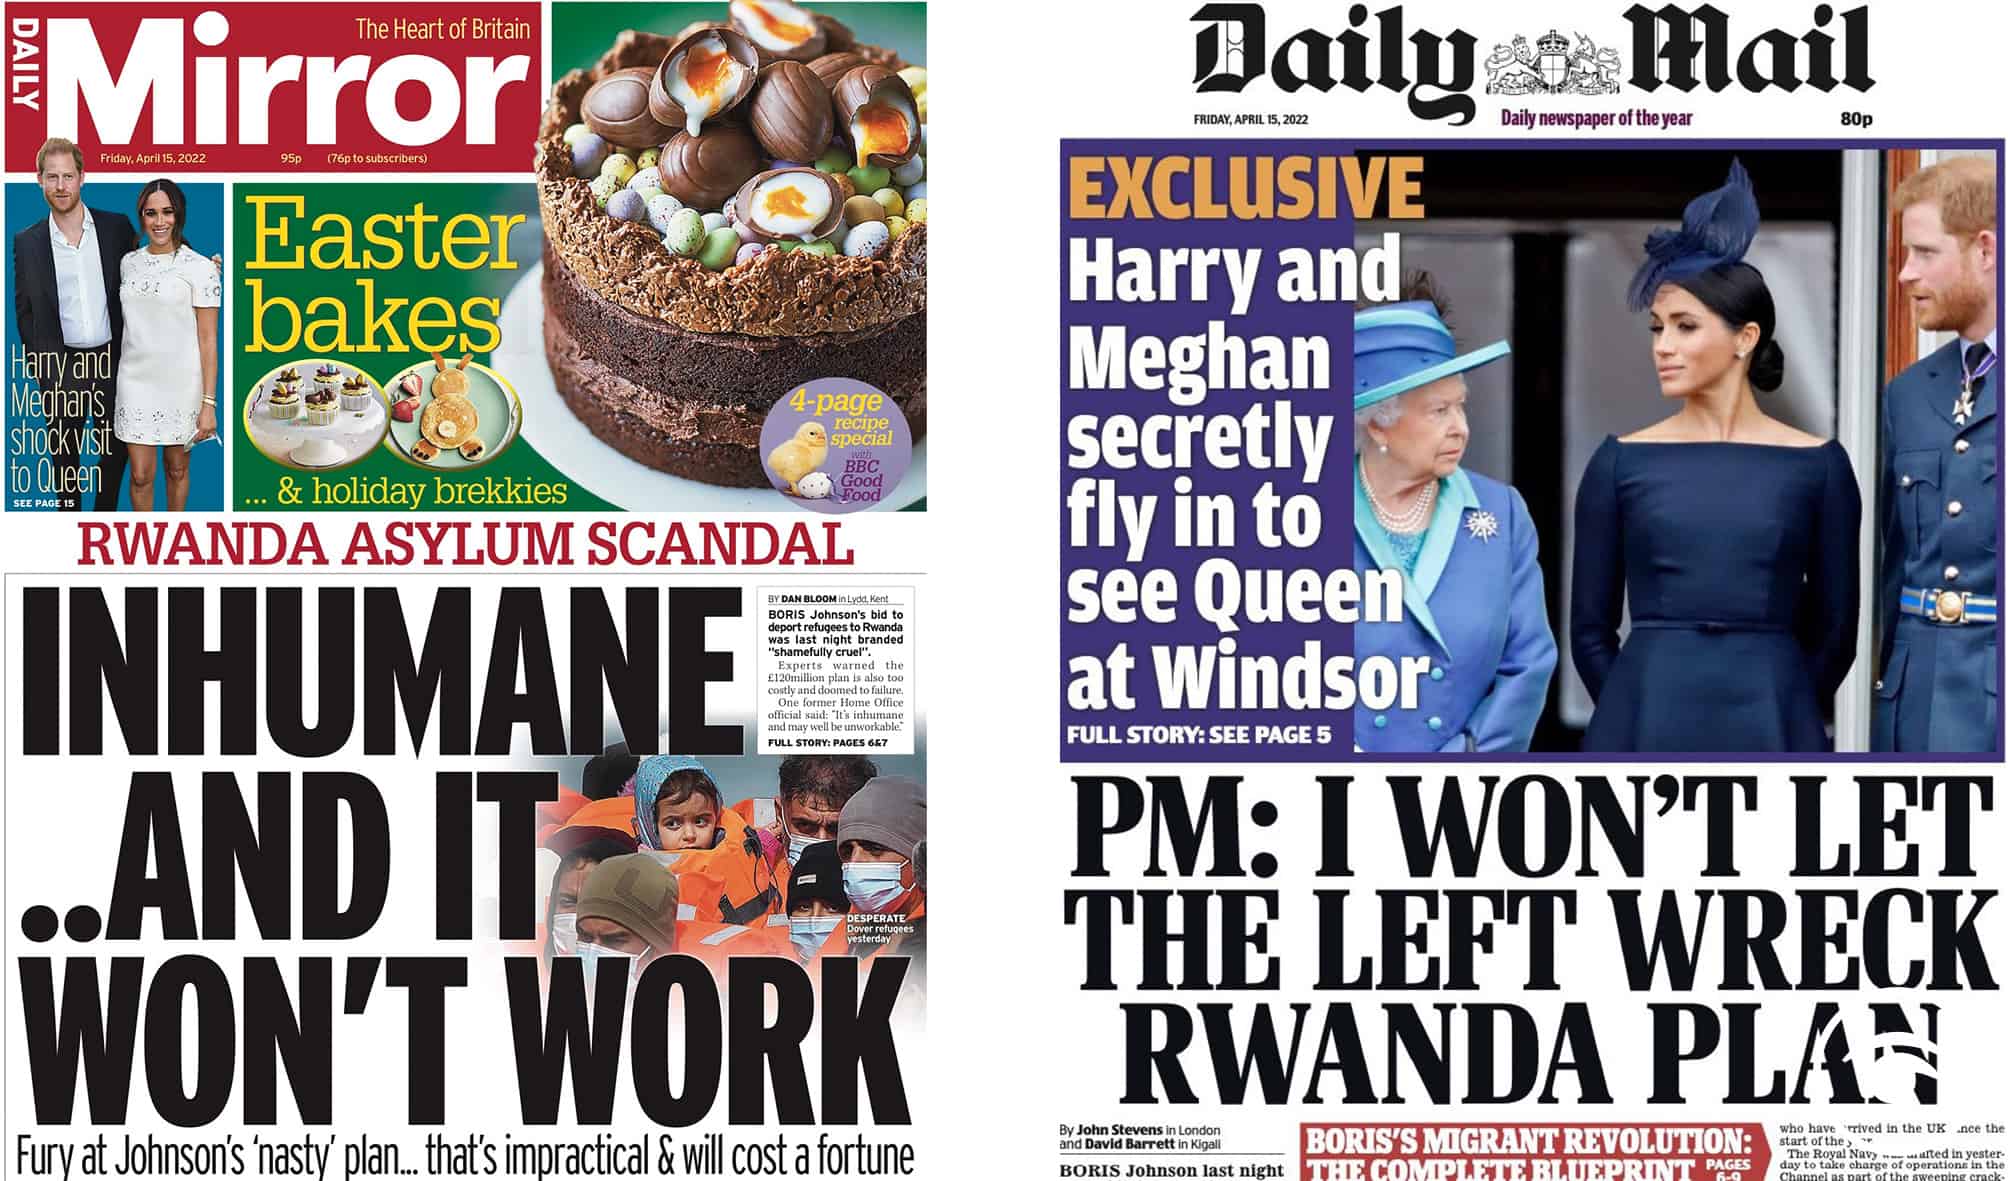 As you can imagine the papers are split over PM’s Rwanda policy…